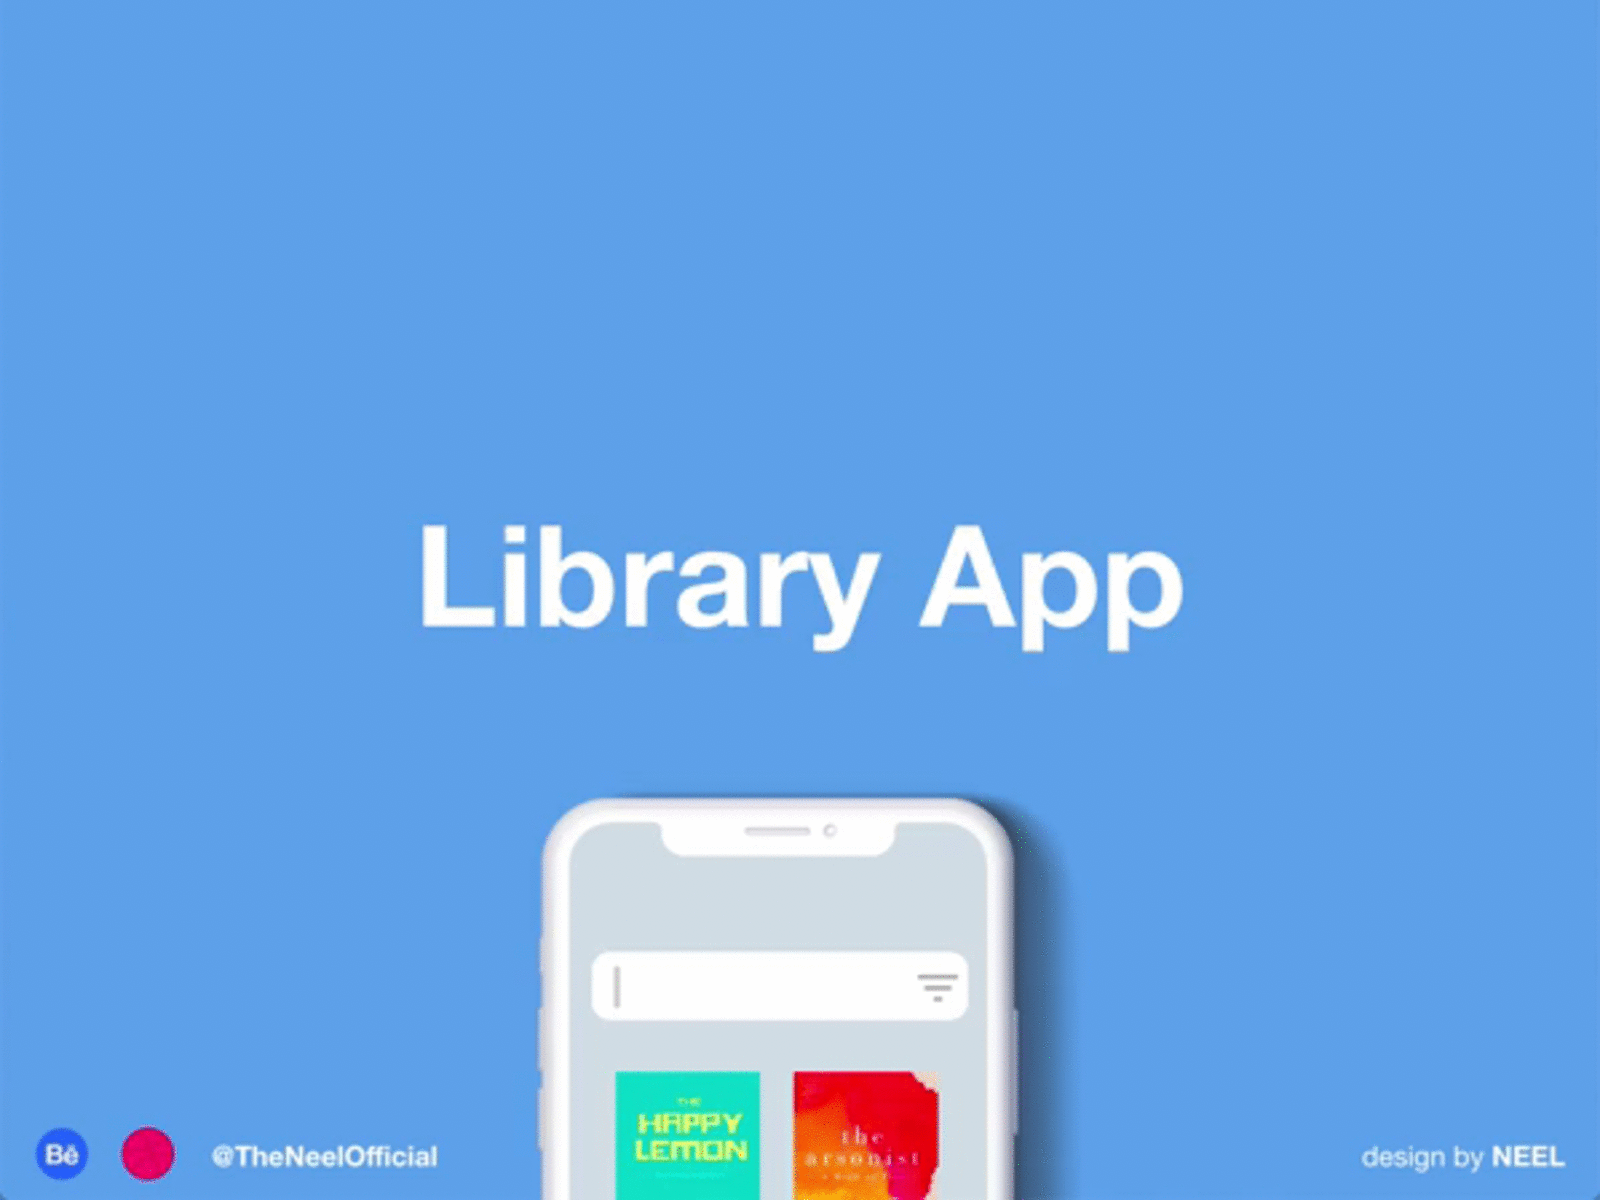 Library App interaction